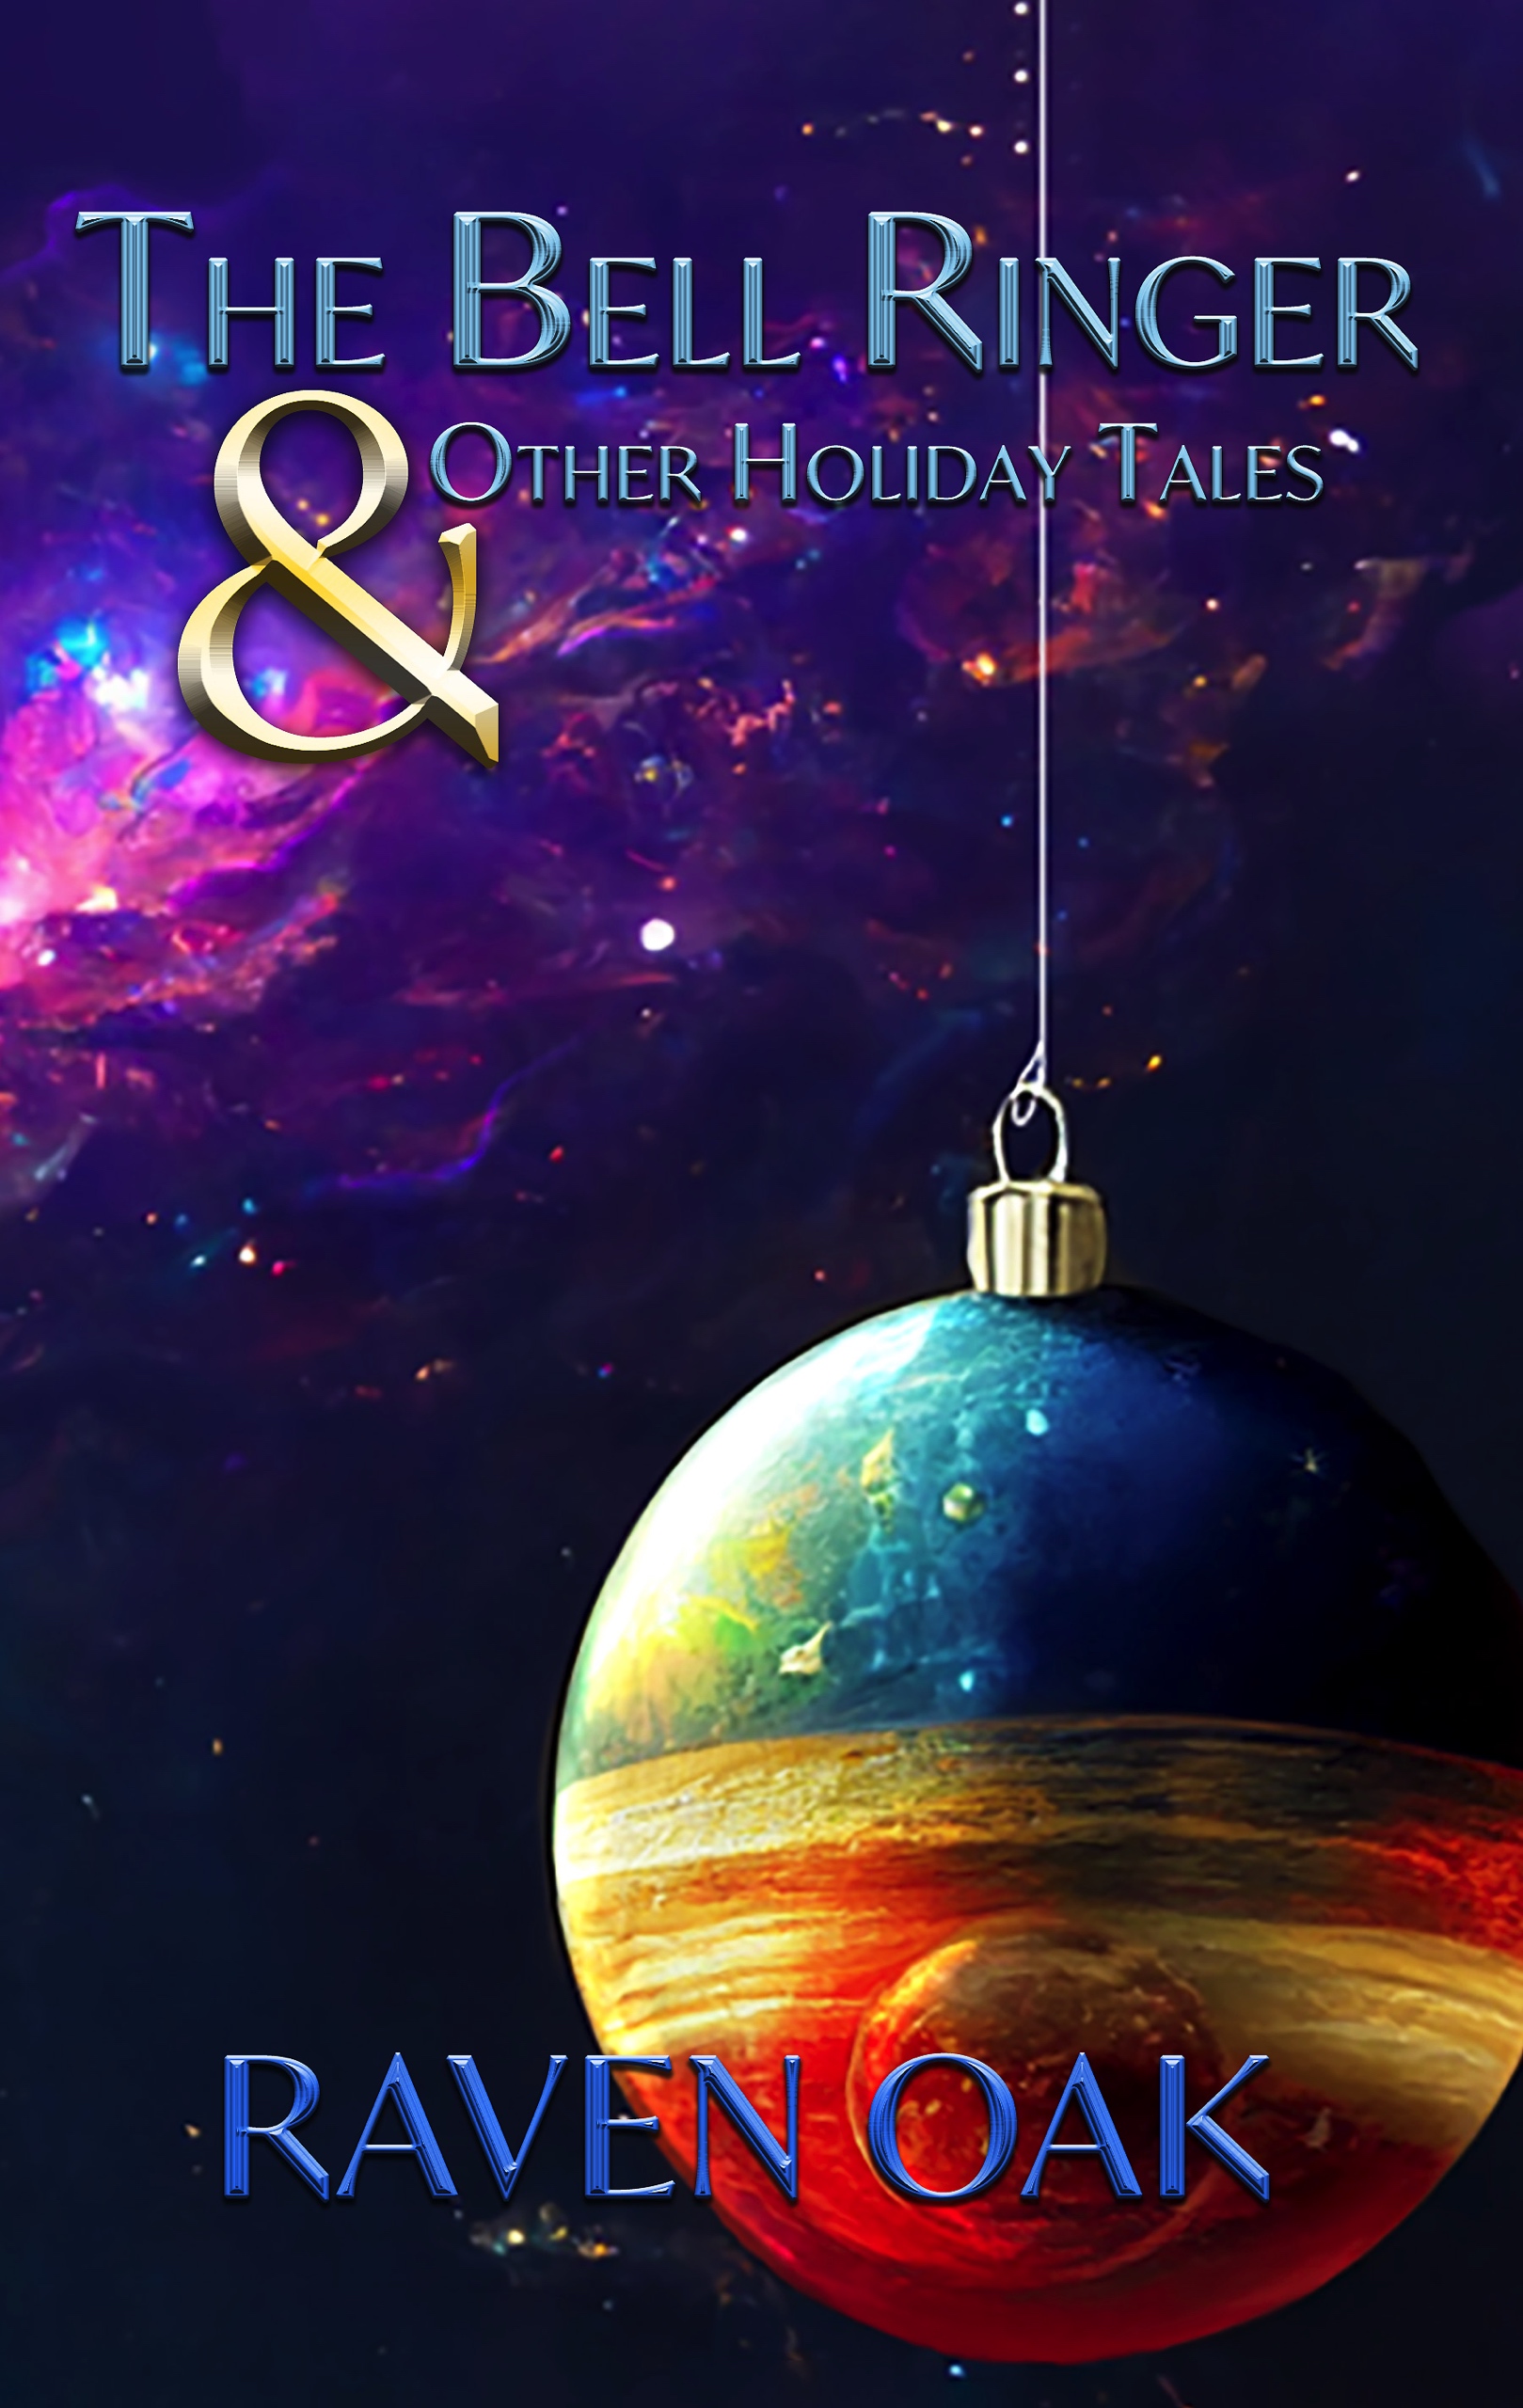 The Bell Ringer & Other Holiday Tales by Raven Oak book cover featuring a planetary holiday tree ornament hanging in space.